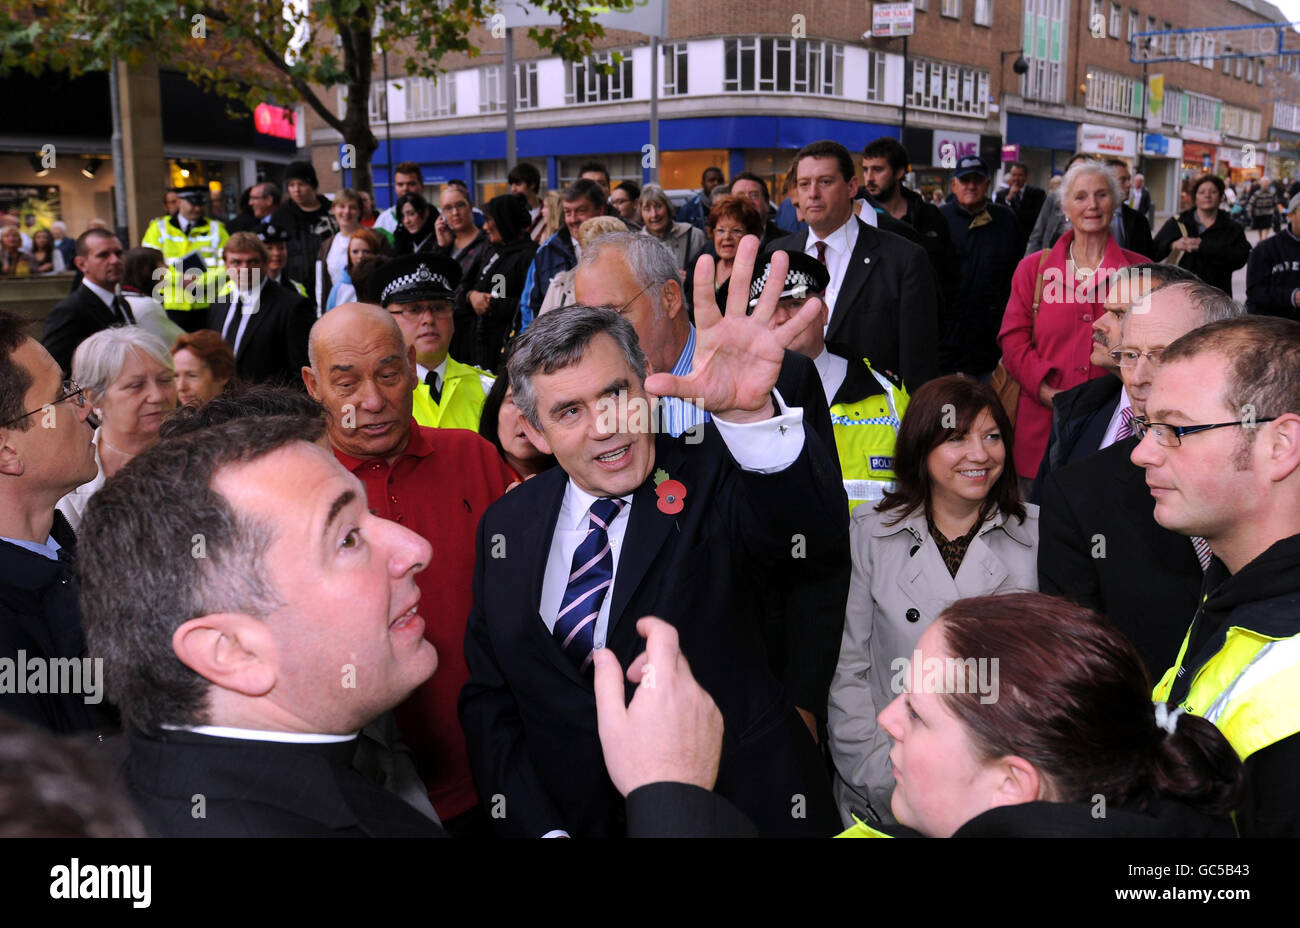 The Prime Minister Gordon Brown meets shoppers during a walkabout in Wakefield City centre today following his visit to the Town Hall where he was told about Crime initiatives in Wakefield. Stock Photo